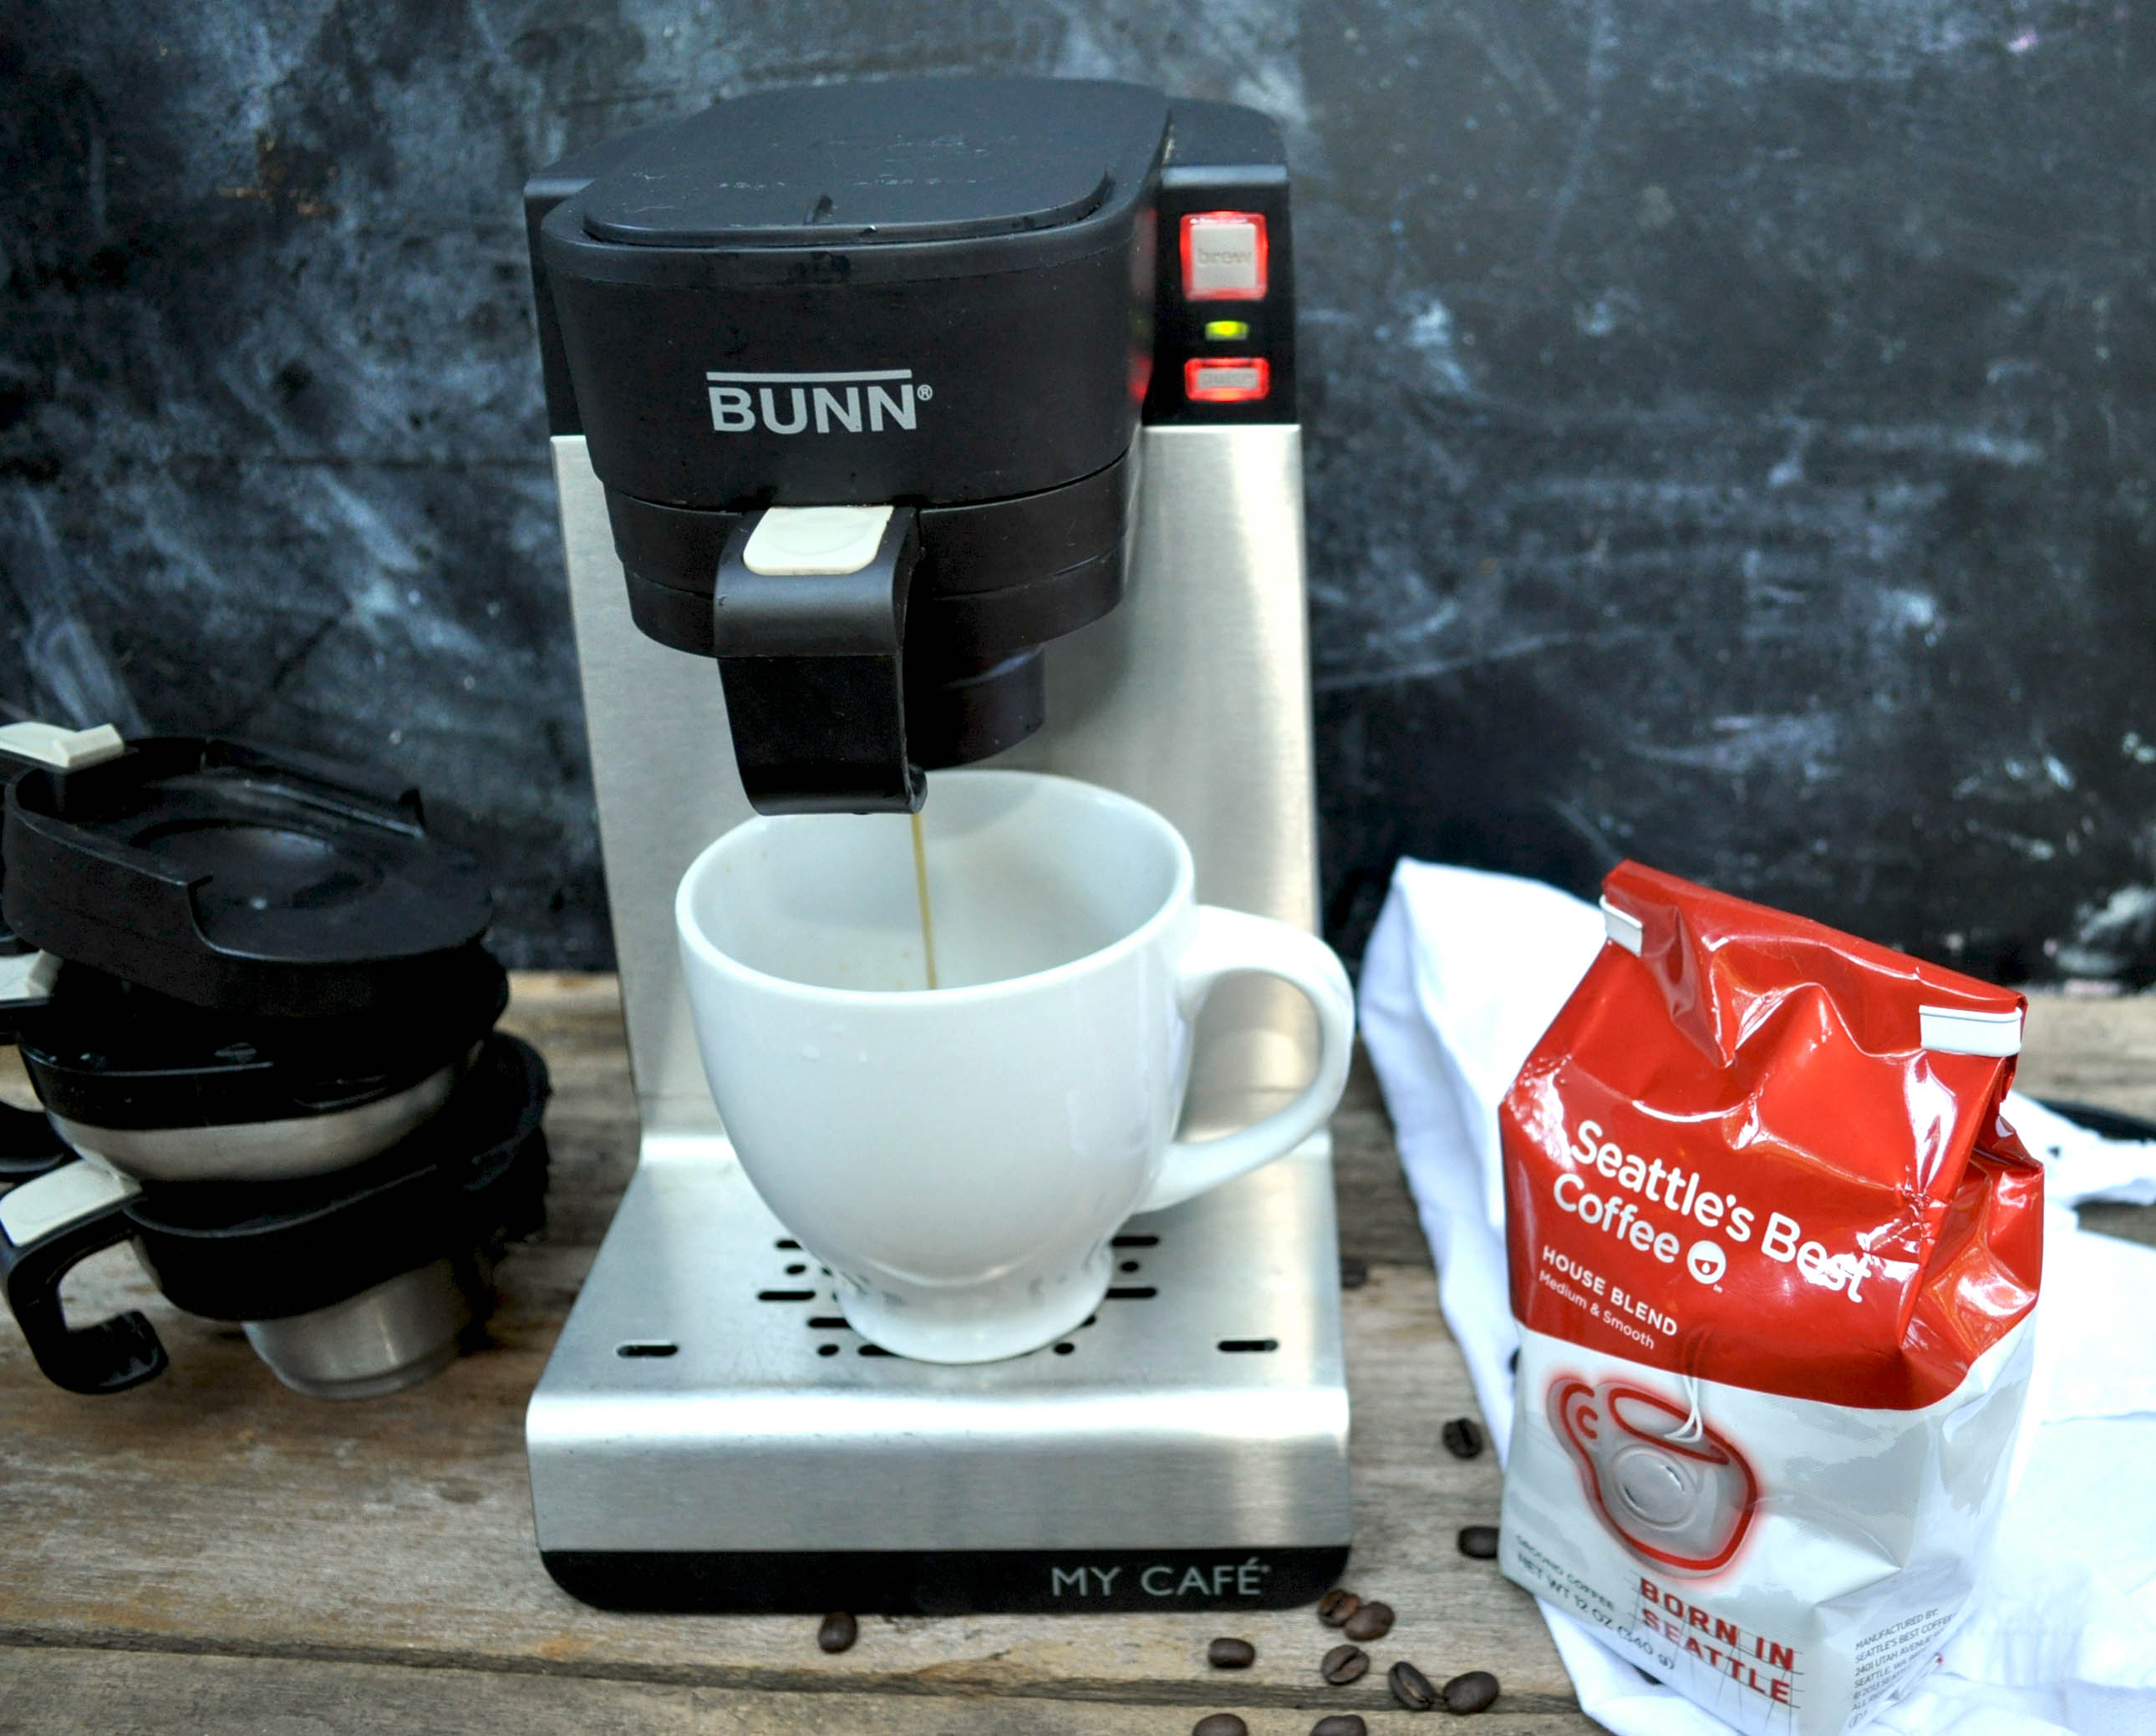 Alternatives to Keurig? - Clumsy Crafter